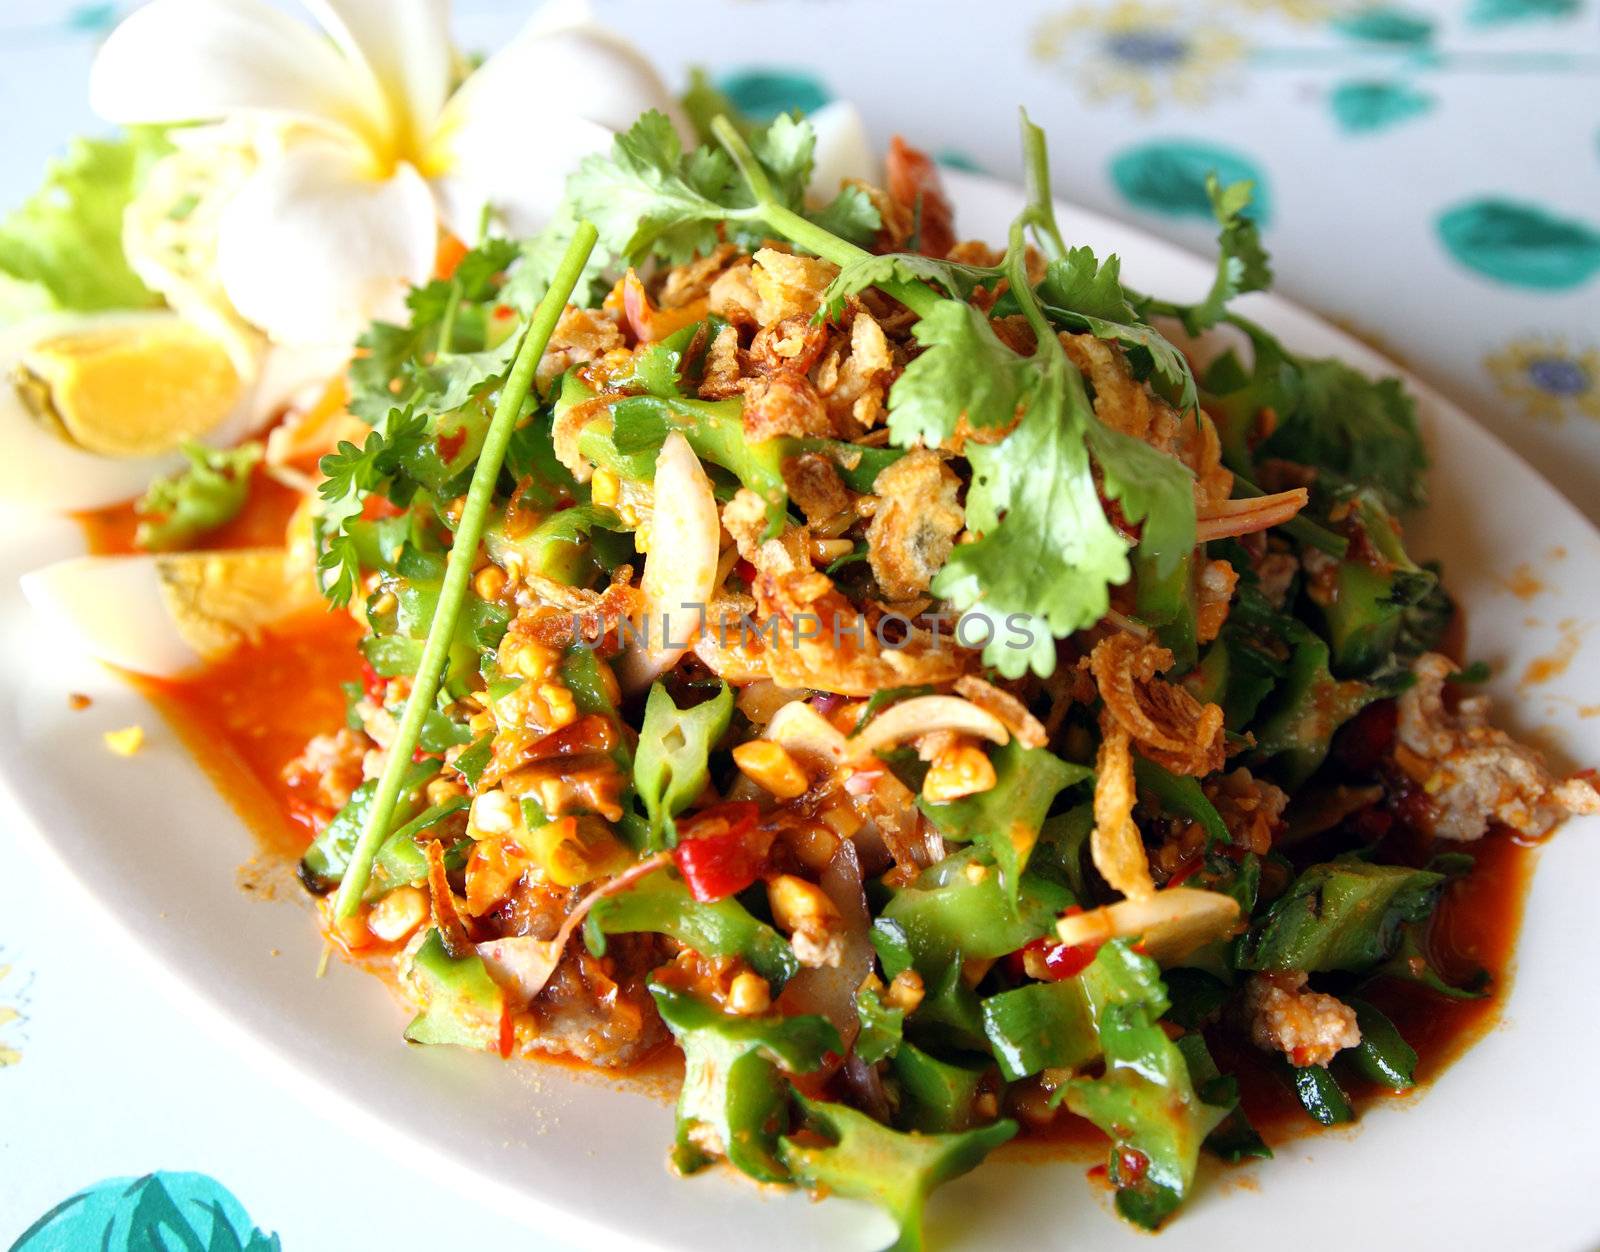 winged bean salad, food of thailand by geargodz